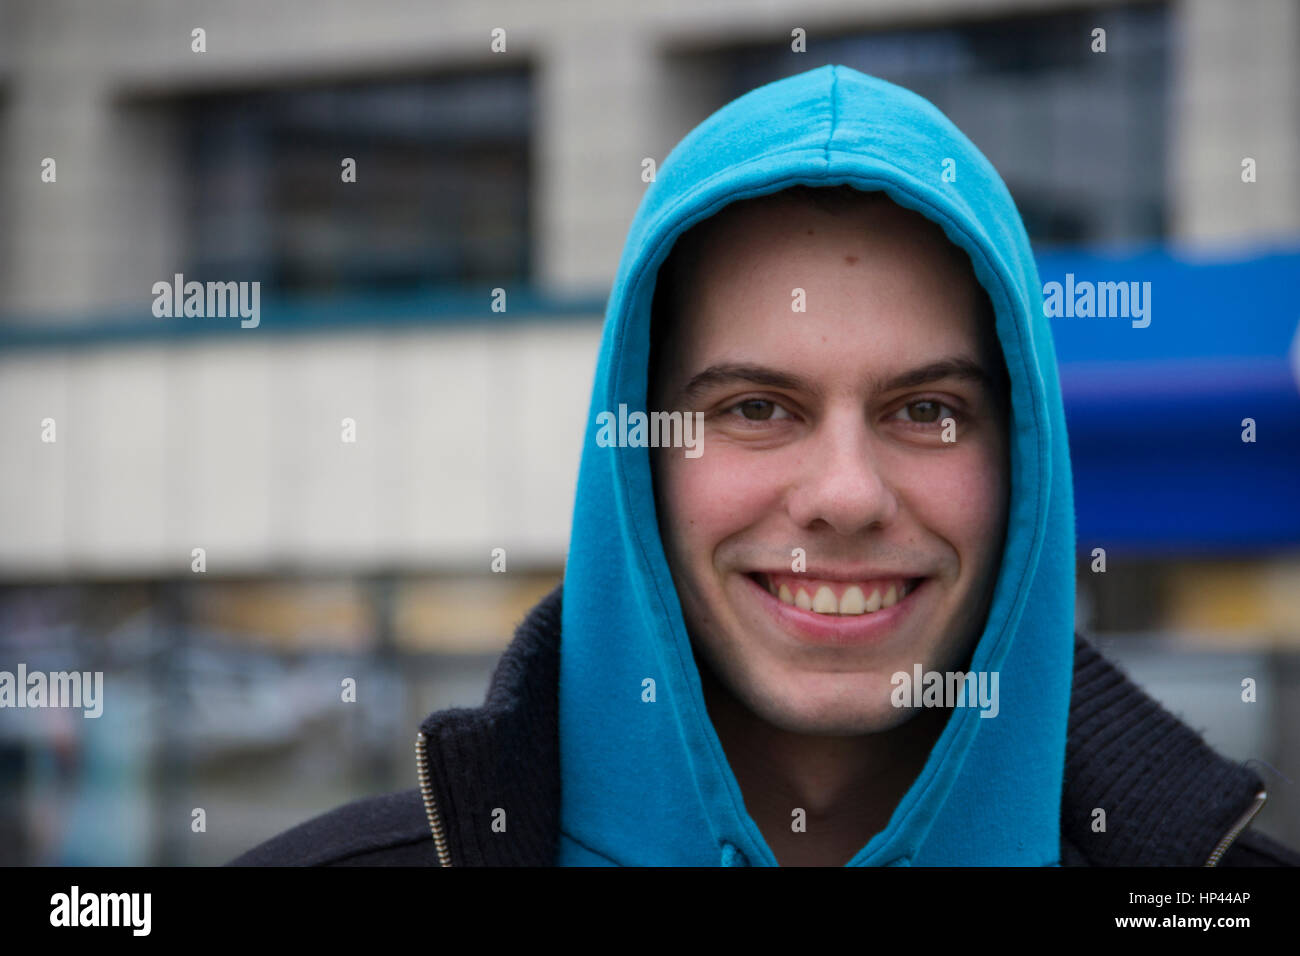 young man with a blue hood Stock Photo